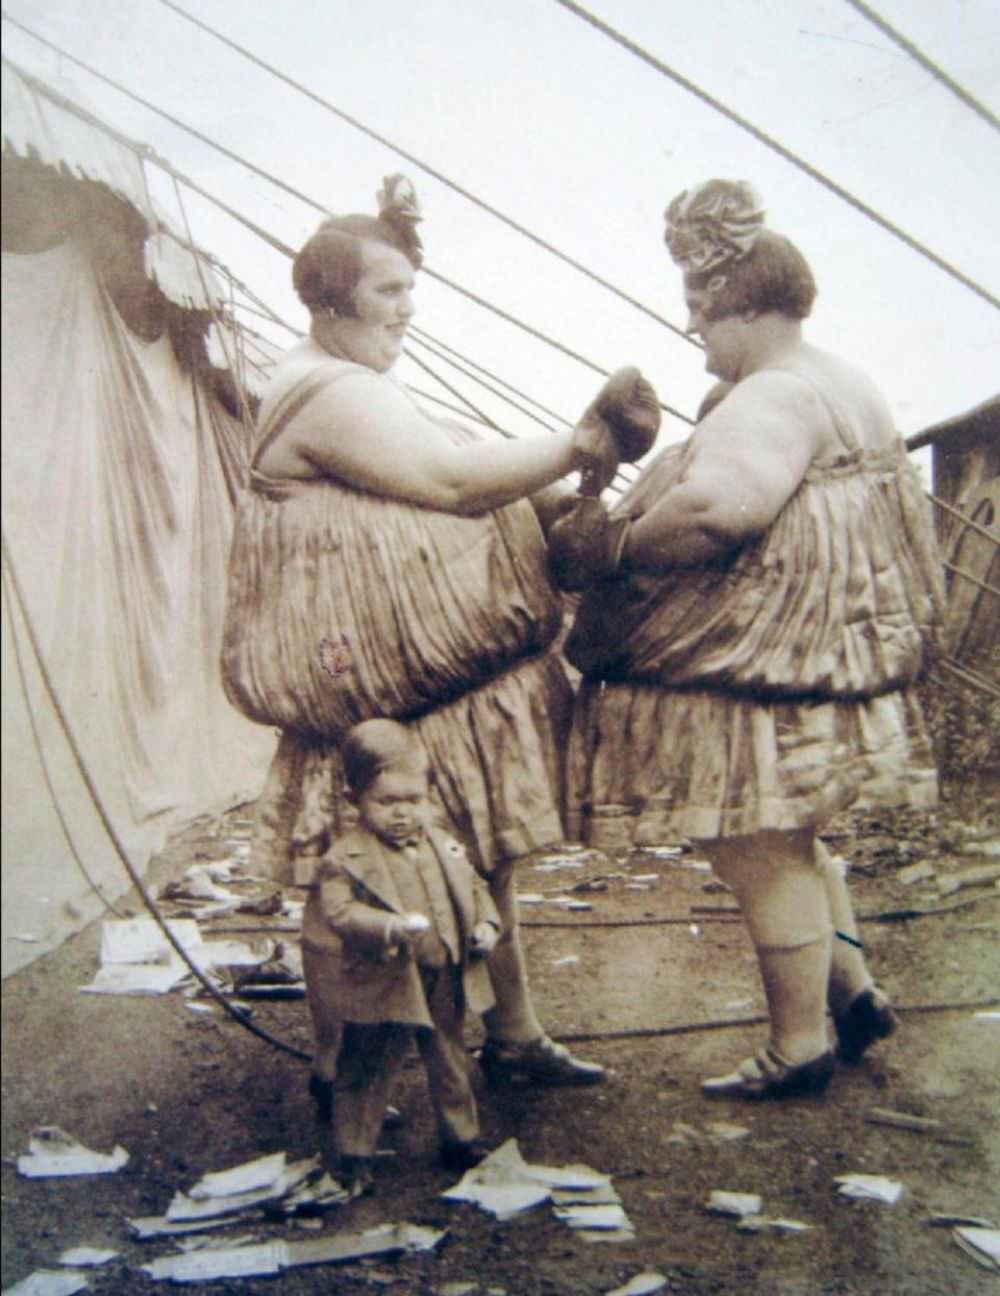 The Carlson Sisters, pictured above, were part of a touring side show circus act, where they would put on a performance as 'fat twins' and would box for paying customers, circa 1925, USA.